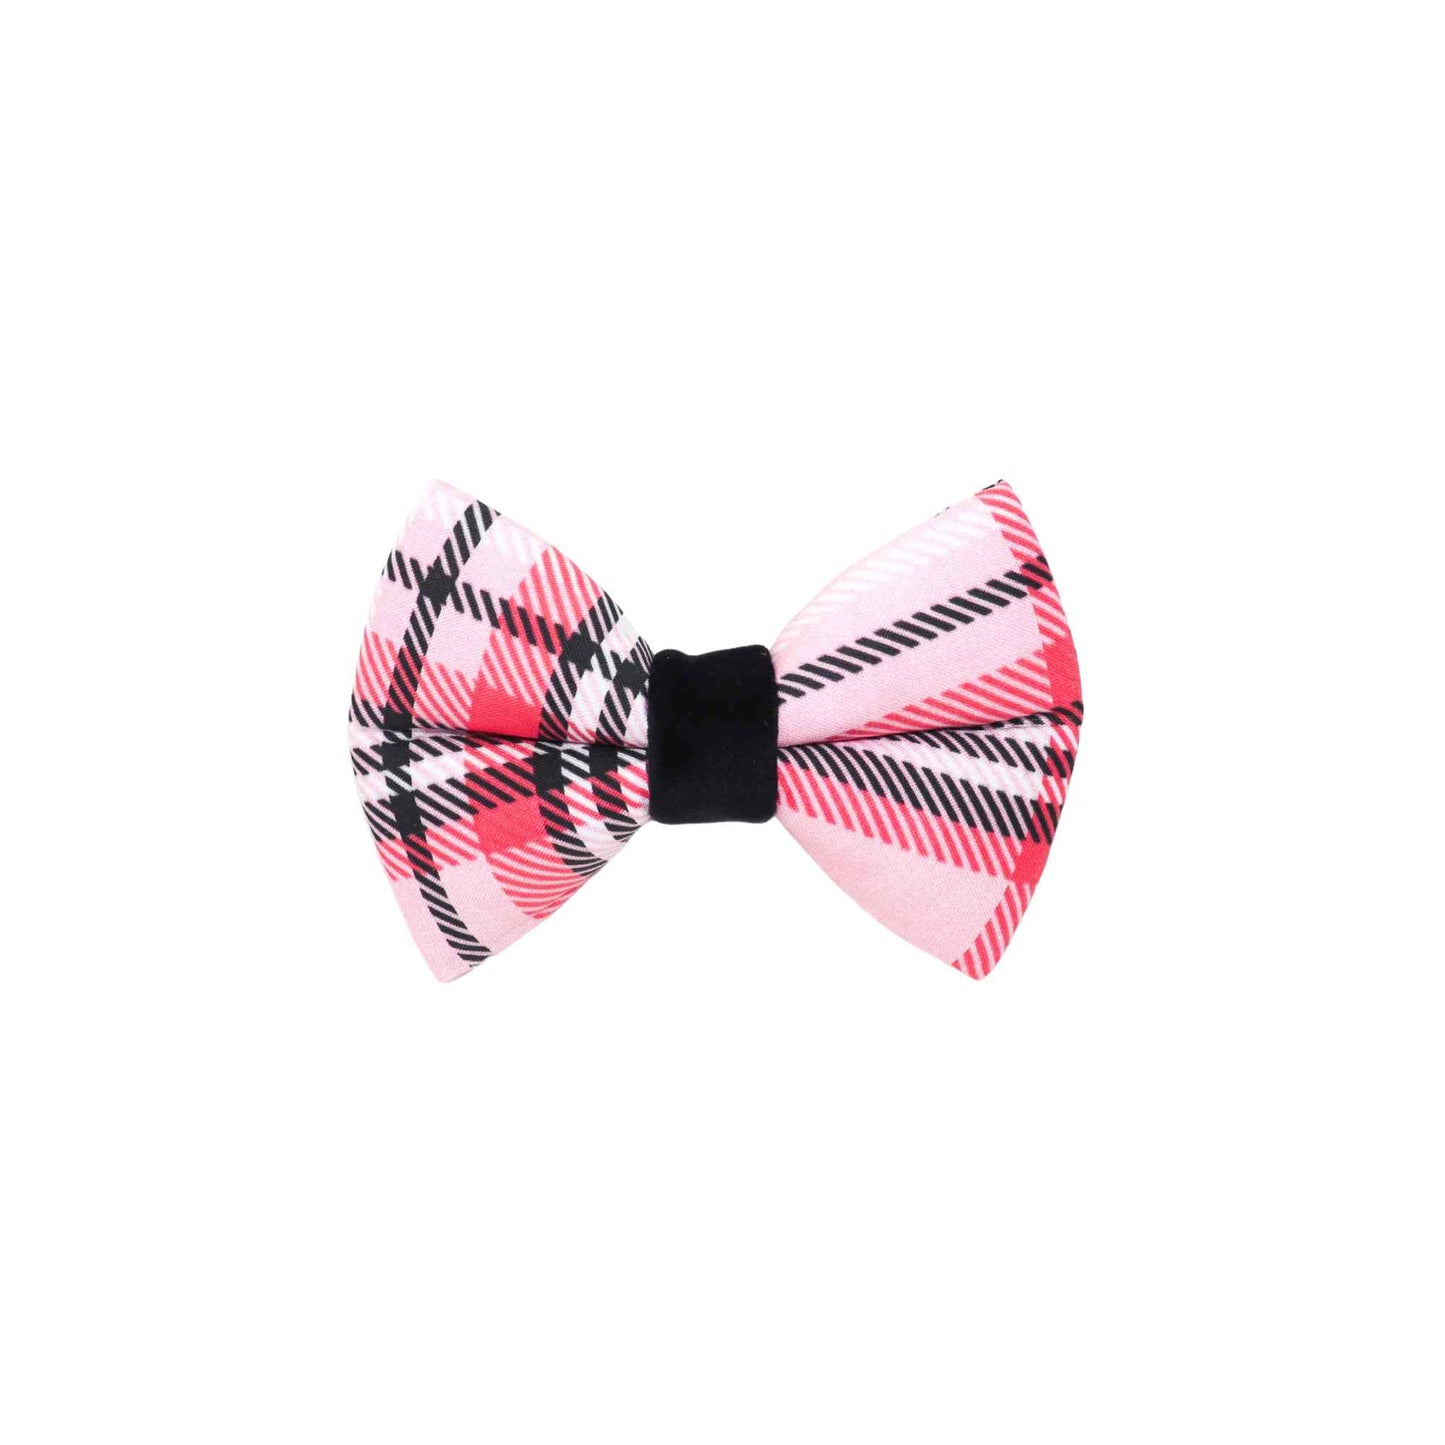 "Clash of Hearts" Puffy Bow Tie